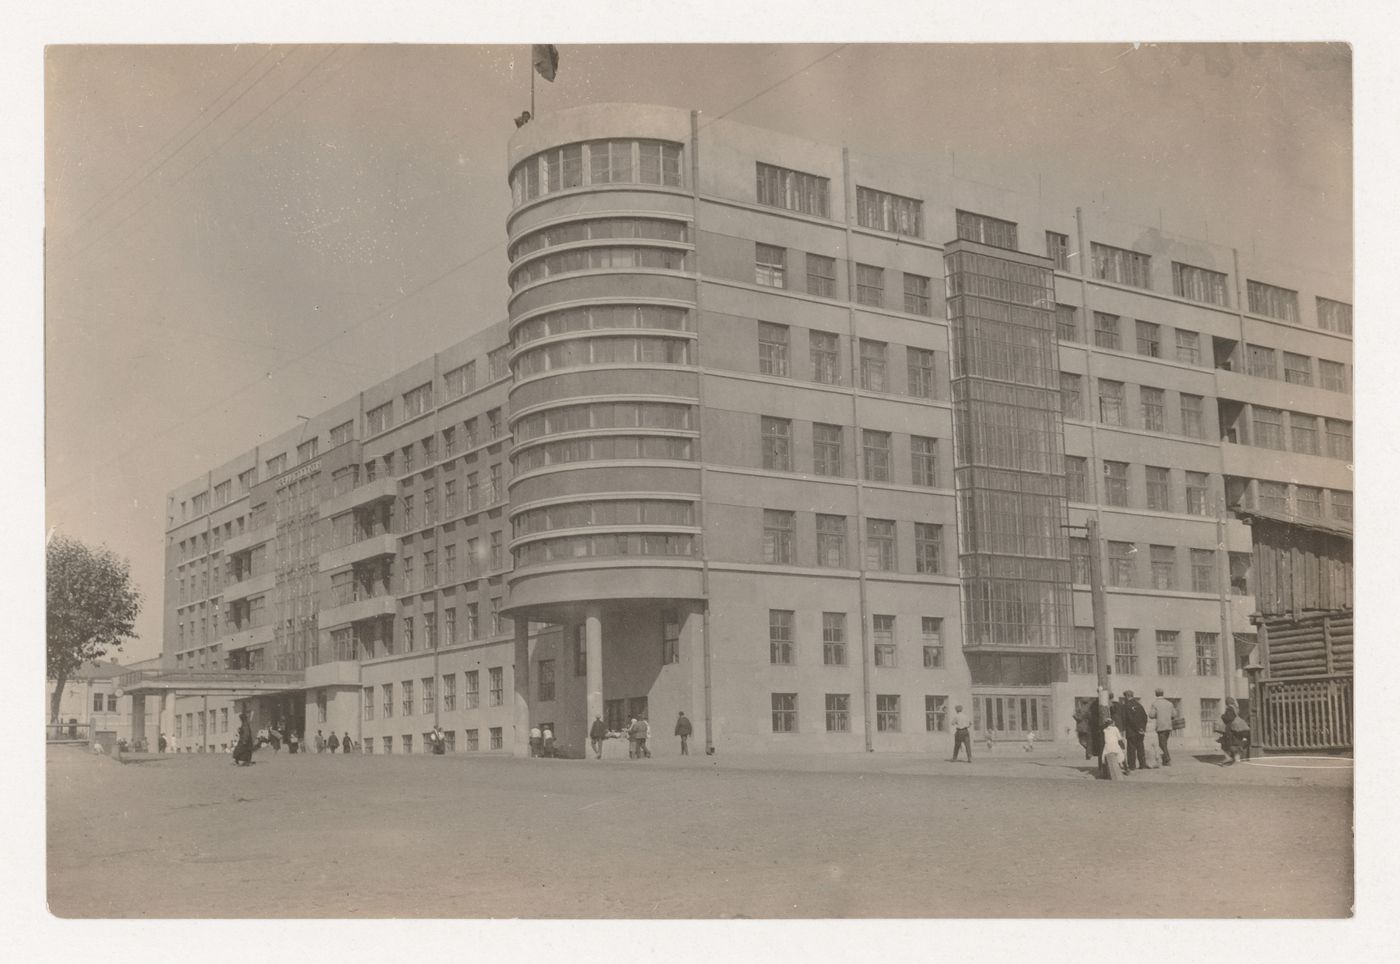 View of the District Executive Committee building from across the street, Novosibirsk, Soviet Union (now in Russia)